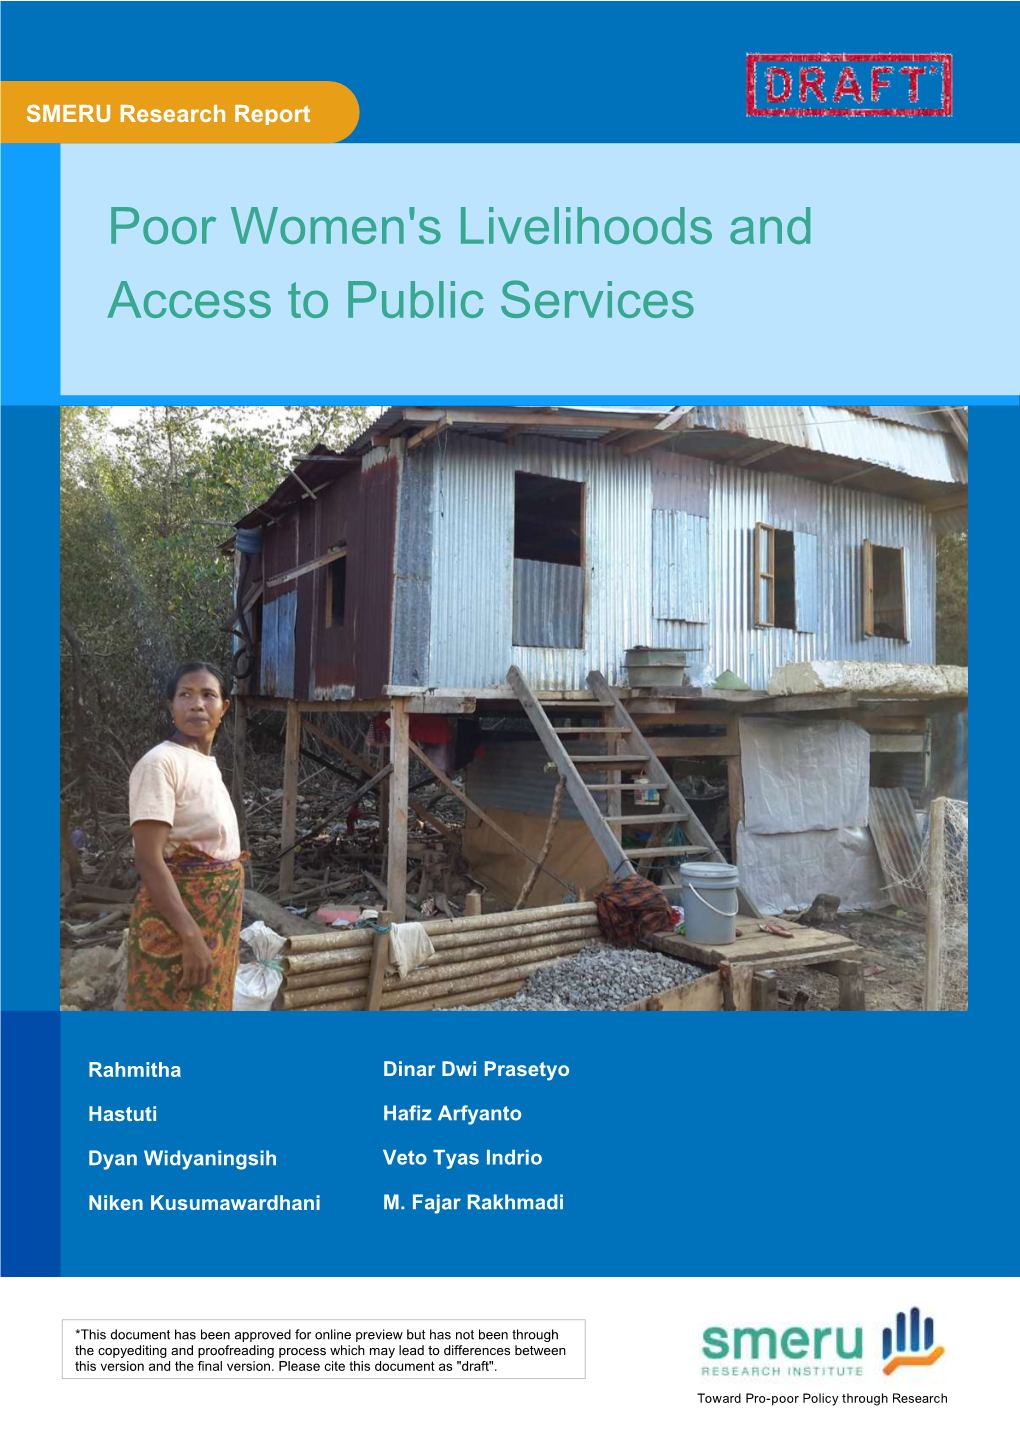 Poor Women's Livelihoods and Access to Public Services